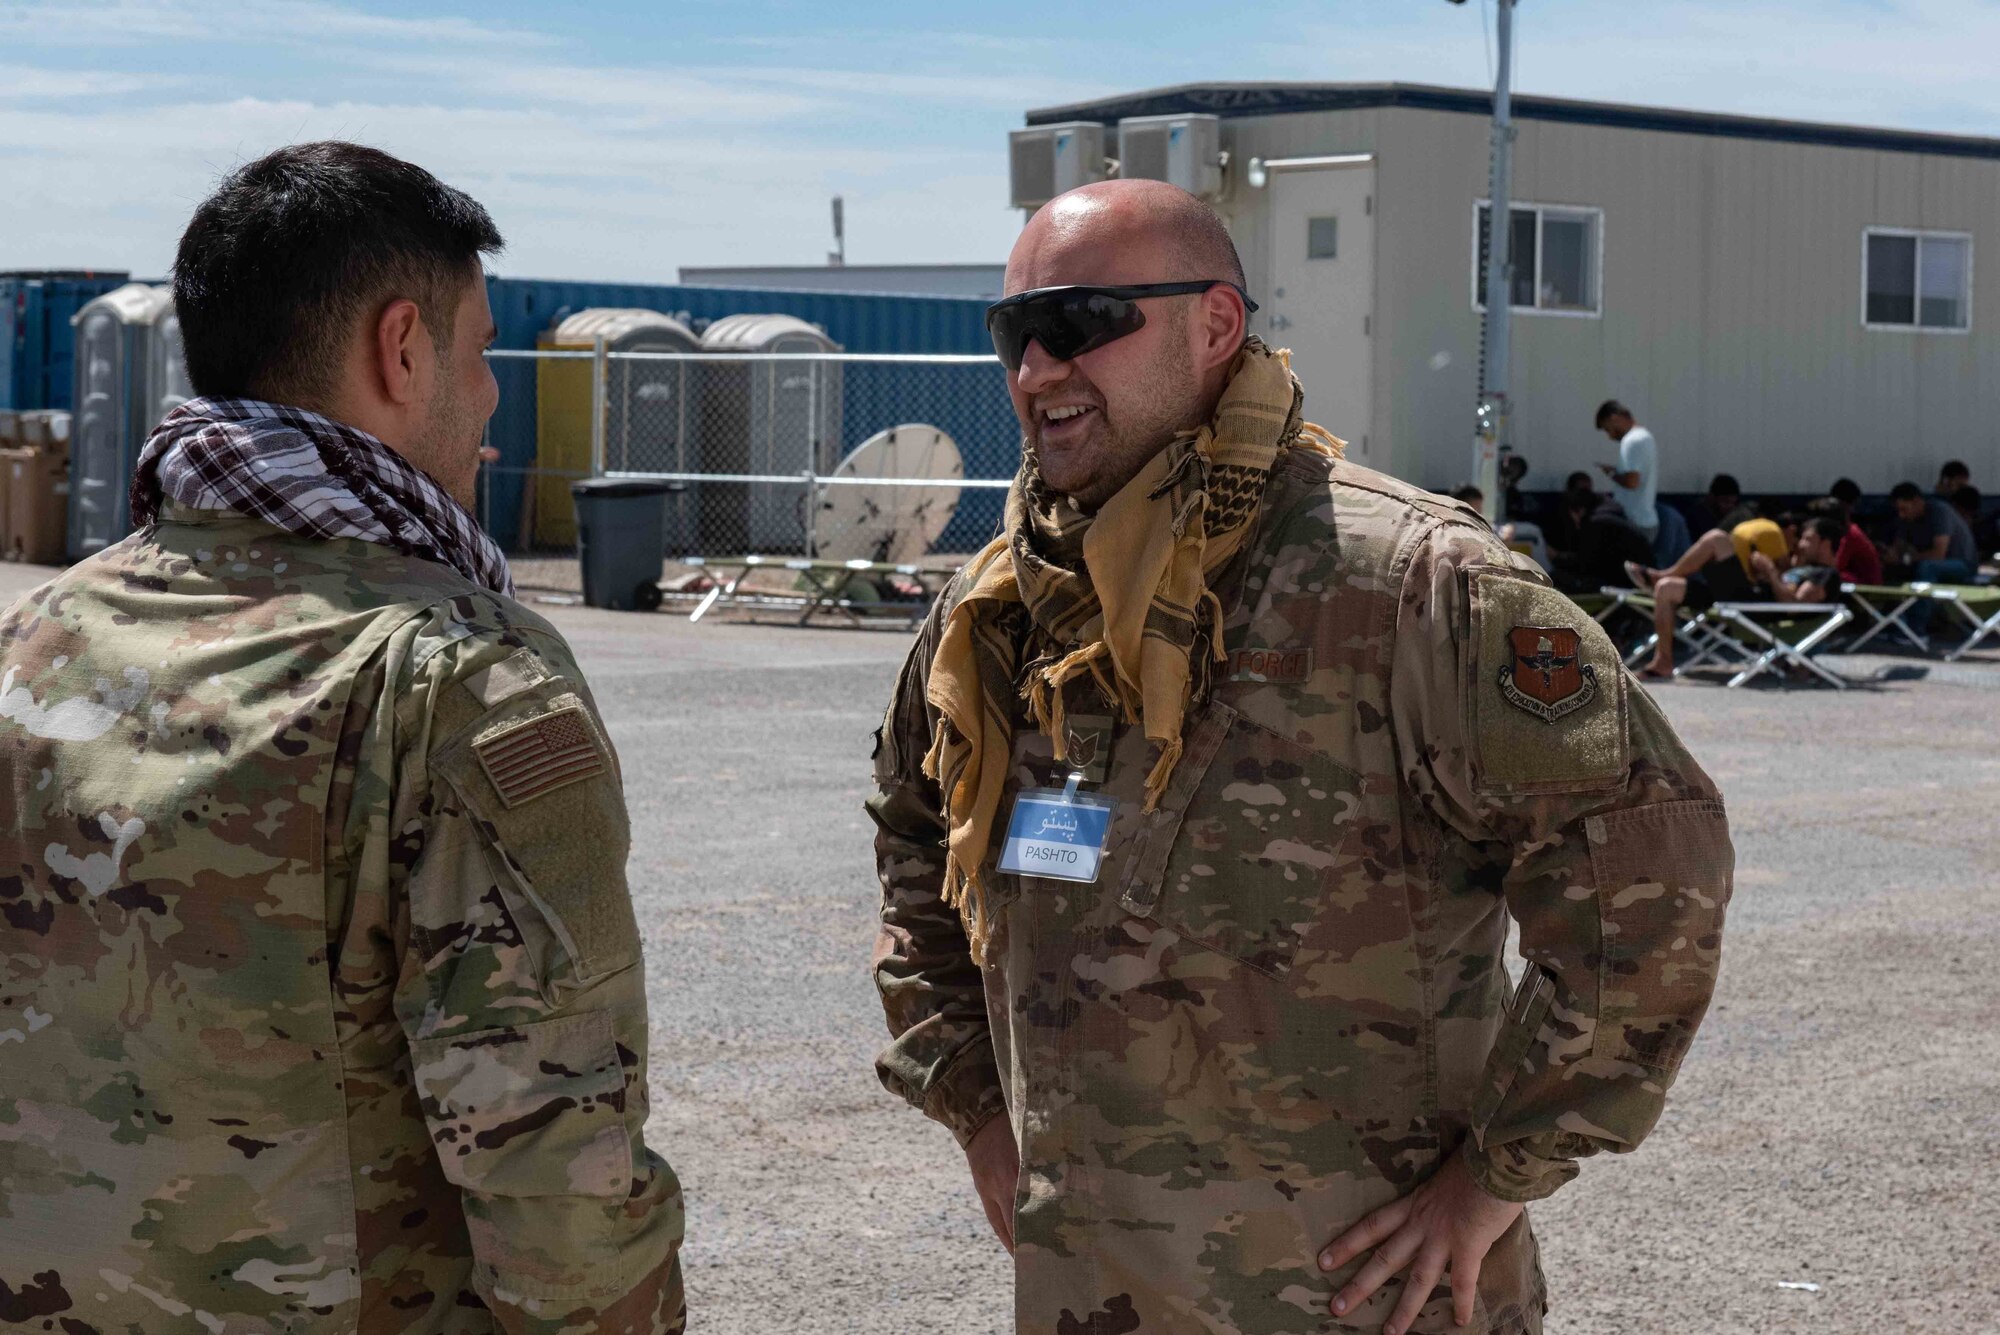 Tech. Sgt. Steven Toma, Task Force-Holloman interpreter deployed from Goodfellow Air Force Base, Texas, speaks with another TF-H interpreter at Aman Omid Village on Holloman Air Force Base, New Mexico, Sept. 23, 2021. The Department of Defense, through U.S. Northern Command, and in support of the Department of State and Department of Homeland Security, is providing transportation, temporary housing, medical screening, and general support for at least 50,000 Afghan evacuees at suitable facilities, in permanent or temporary structures, as quickly as possible. This initiative provides Afghan evacuees essential support at secure locations outside Afghanistan. (U.S. Air Force photo by Staff Sgt. Kenneth Boyton)